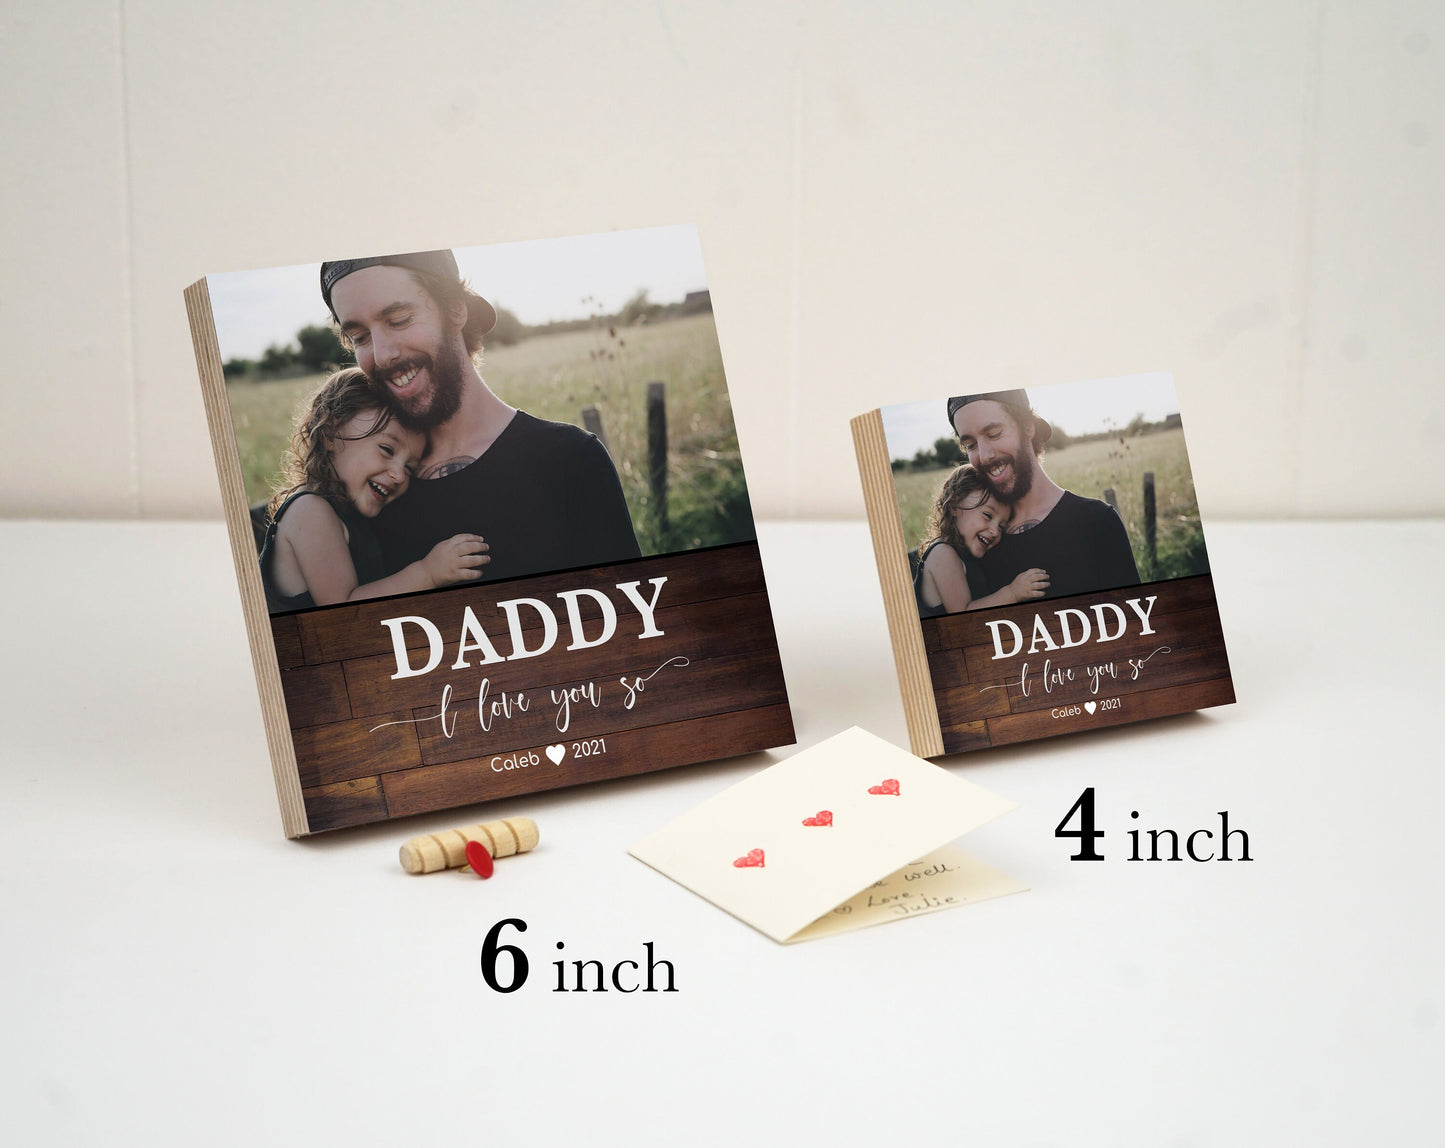 Personalized Father's Day Gift Frame  - 4" or 6" Photo Block w/ Handwritten Card - Fathers Day Gift from Son - Gift for Dad Gift Box